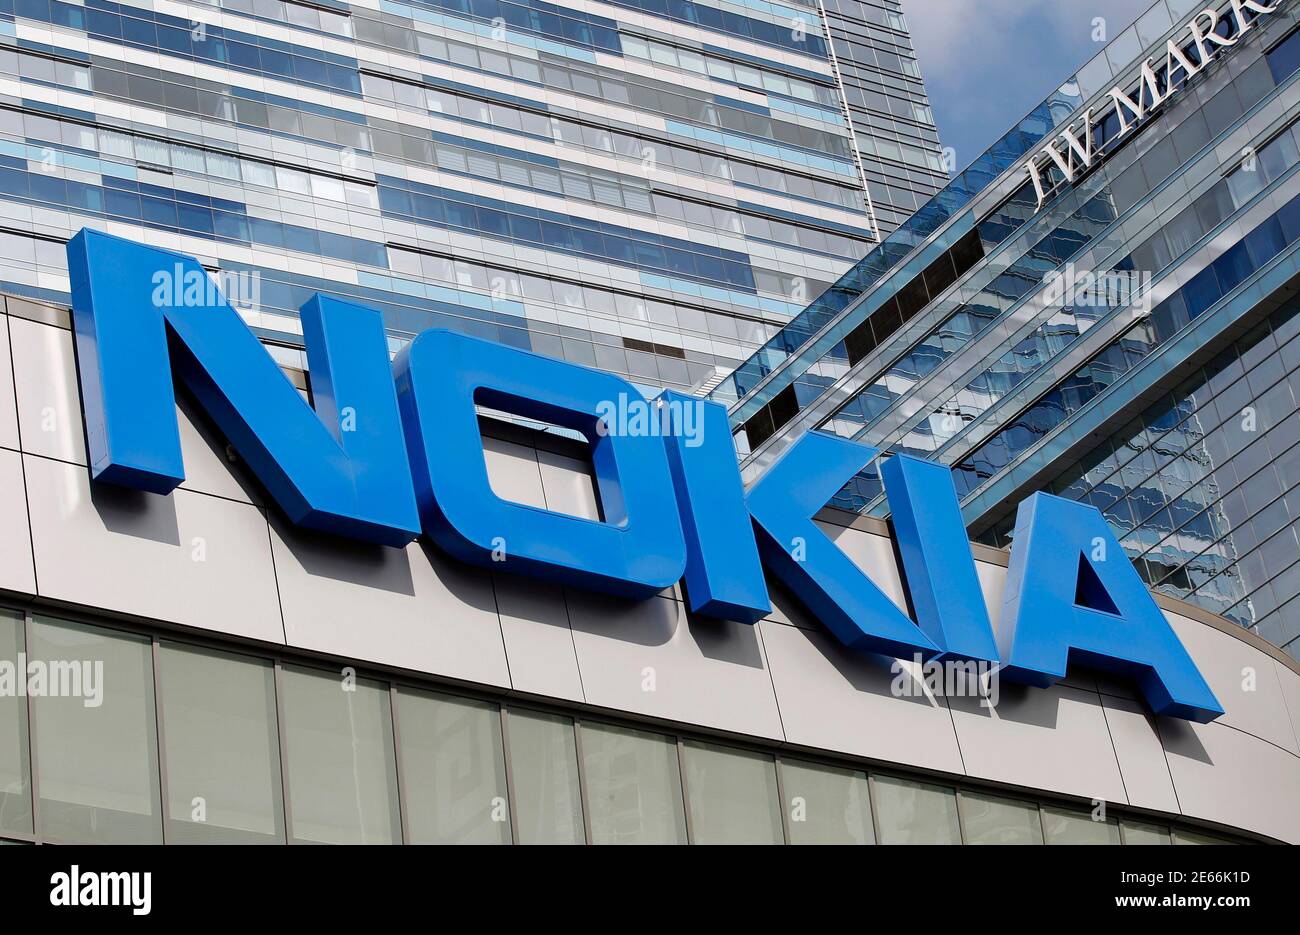 A sign for Nokia Theatre is pictured in Los Angeles, California October 9, 2012. Billionaire Phil Anschutz has kicked off the auction of his Anschutz Entertainment Group, with an expectation that the sports and entertainment giant should draw bids in the $10 billion range, higher than previously believed, according to sources familiar with the situation.   REUTERS/Mario Anzuoni (UNITED STATES - Tags: ENTERTAINMENT BUSINESS) Stock Photo